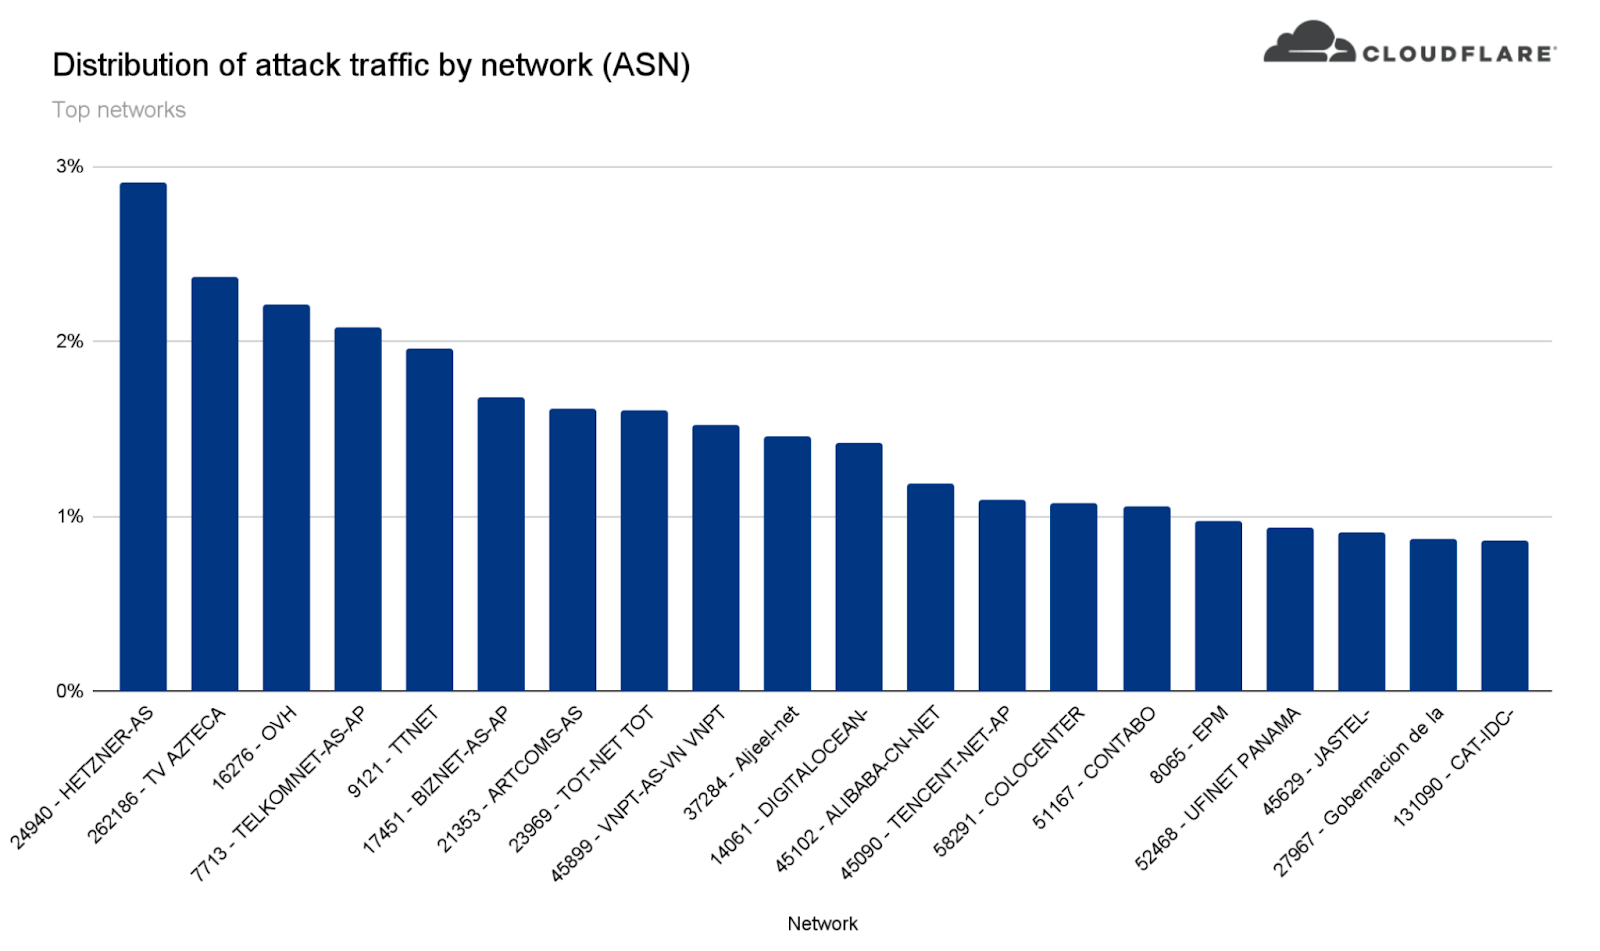 Graph of the distribution of attack traffic by the top networks (ASN)